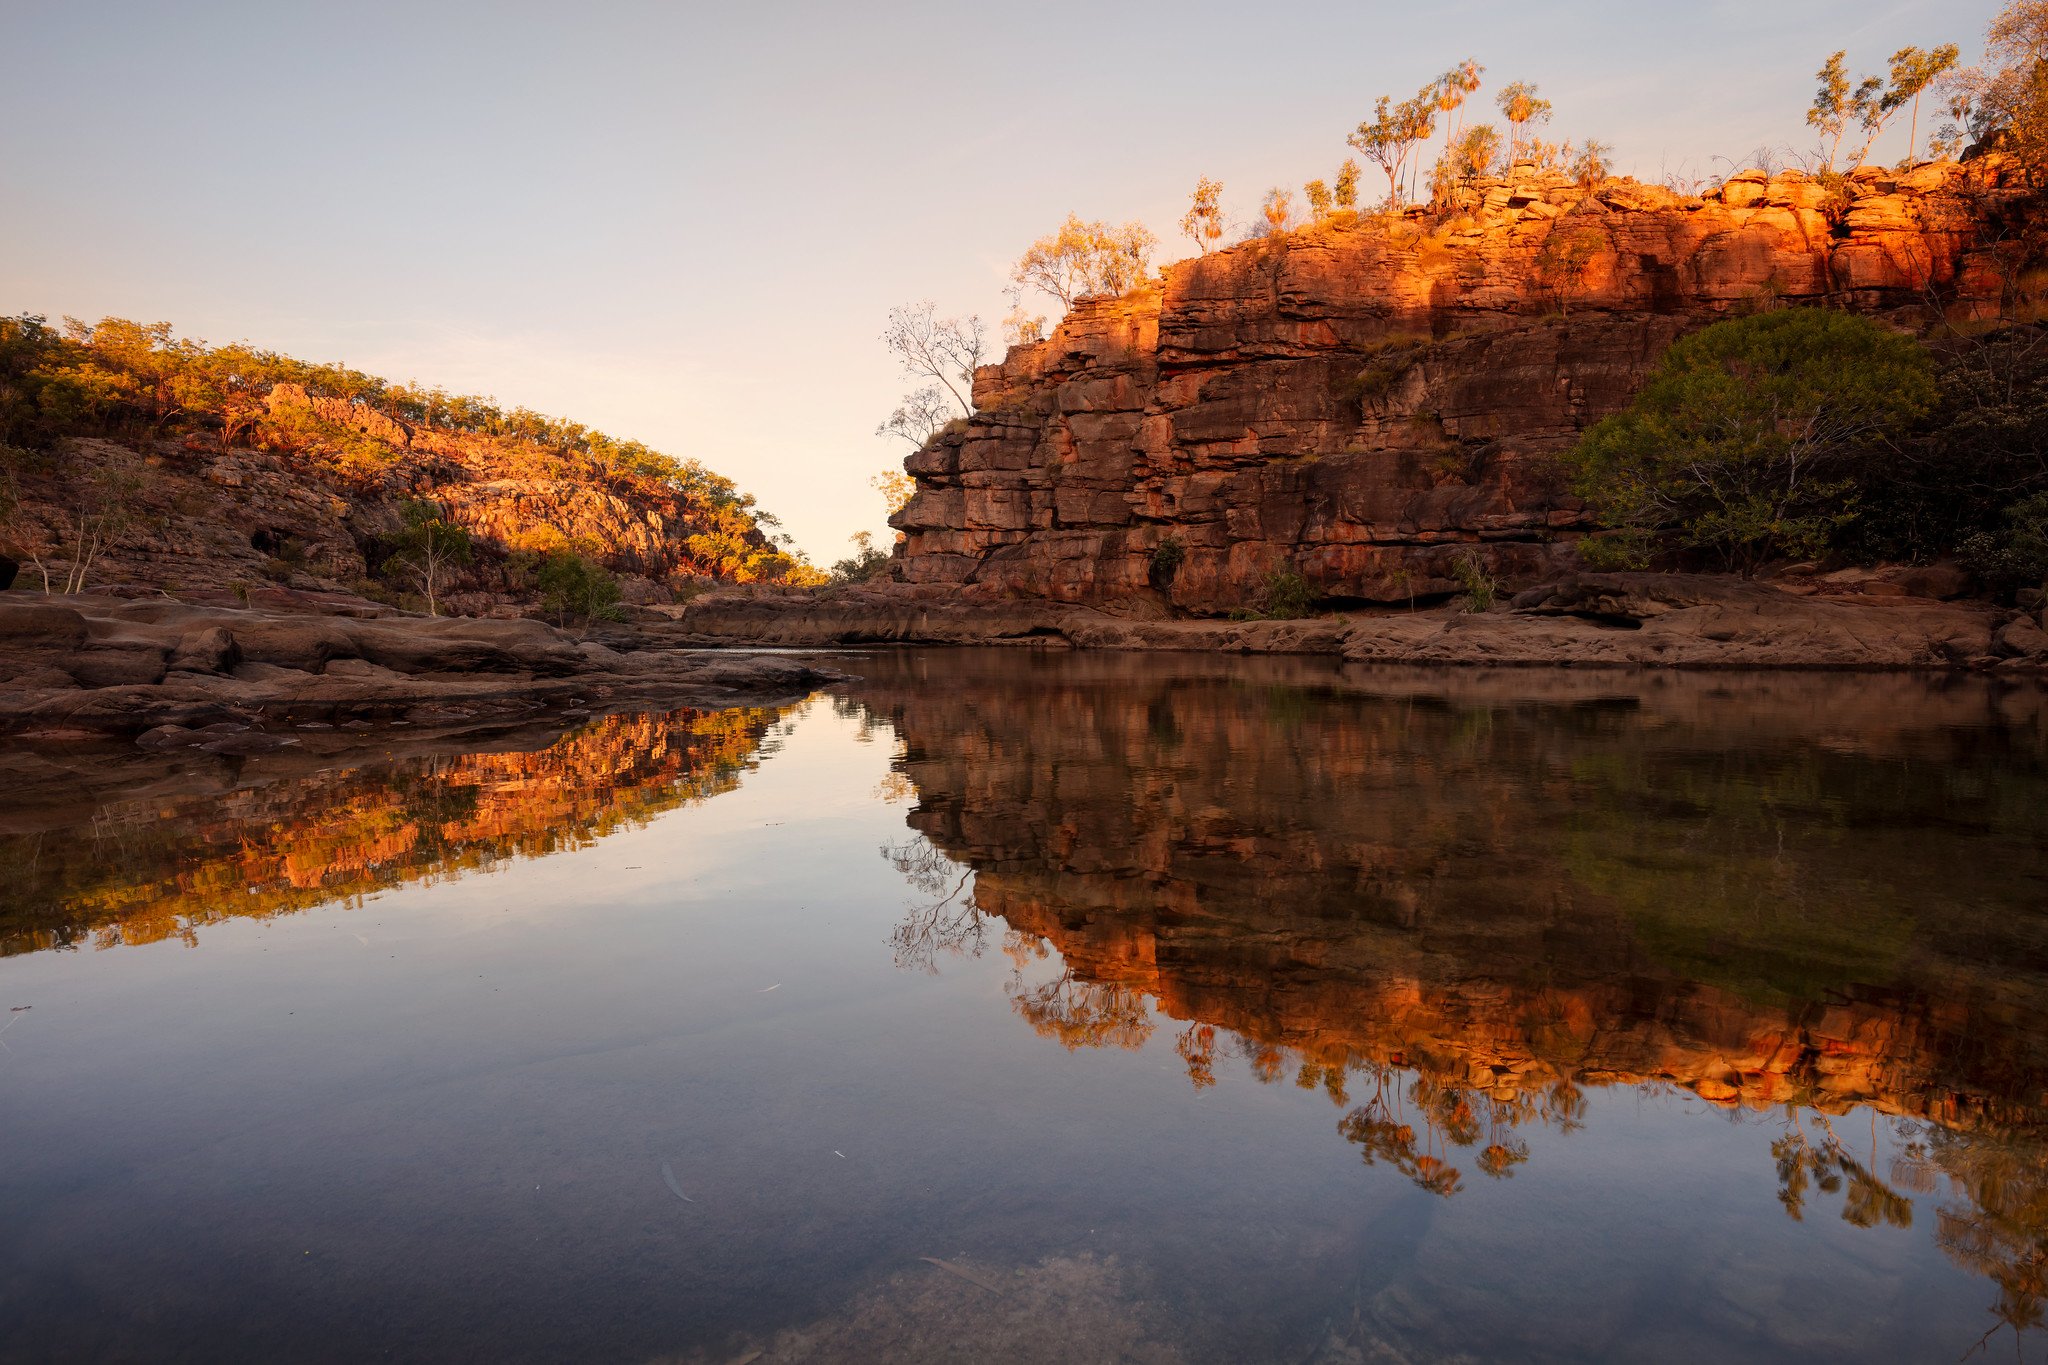 My favourite time of year to photograph is the wet season - BUT - there are some extra special places that are only accessible in the dry season! 

Koolpin Gorge in Kakadu is one of those places, and it's definitely one of my favourites. I'm lucky en